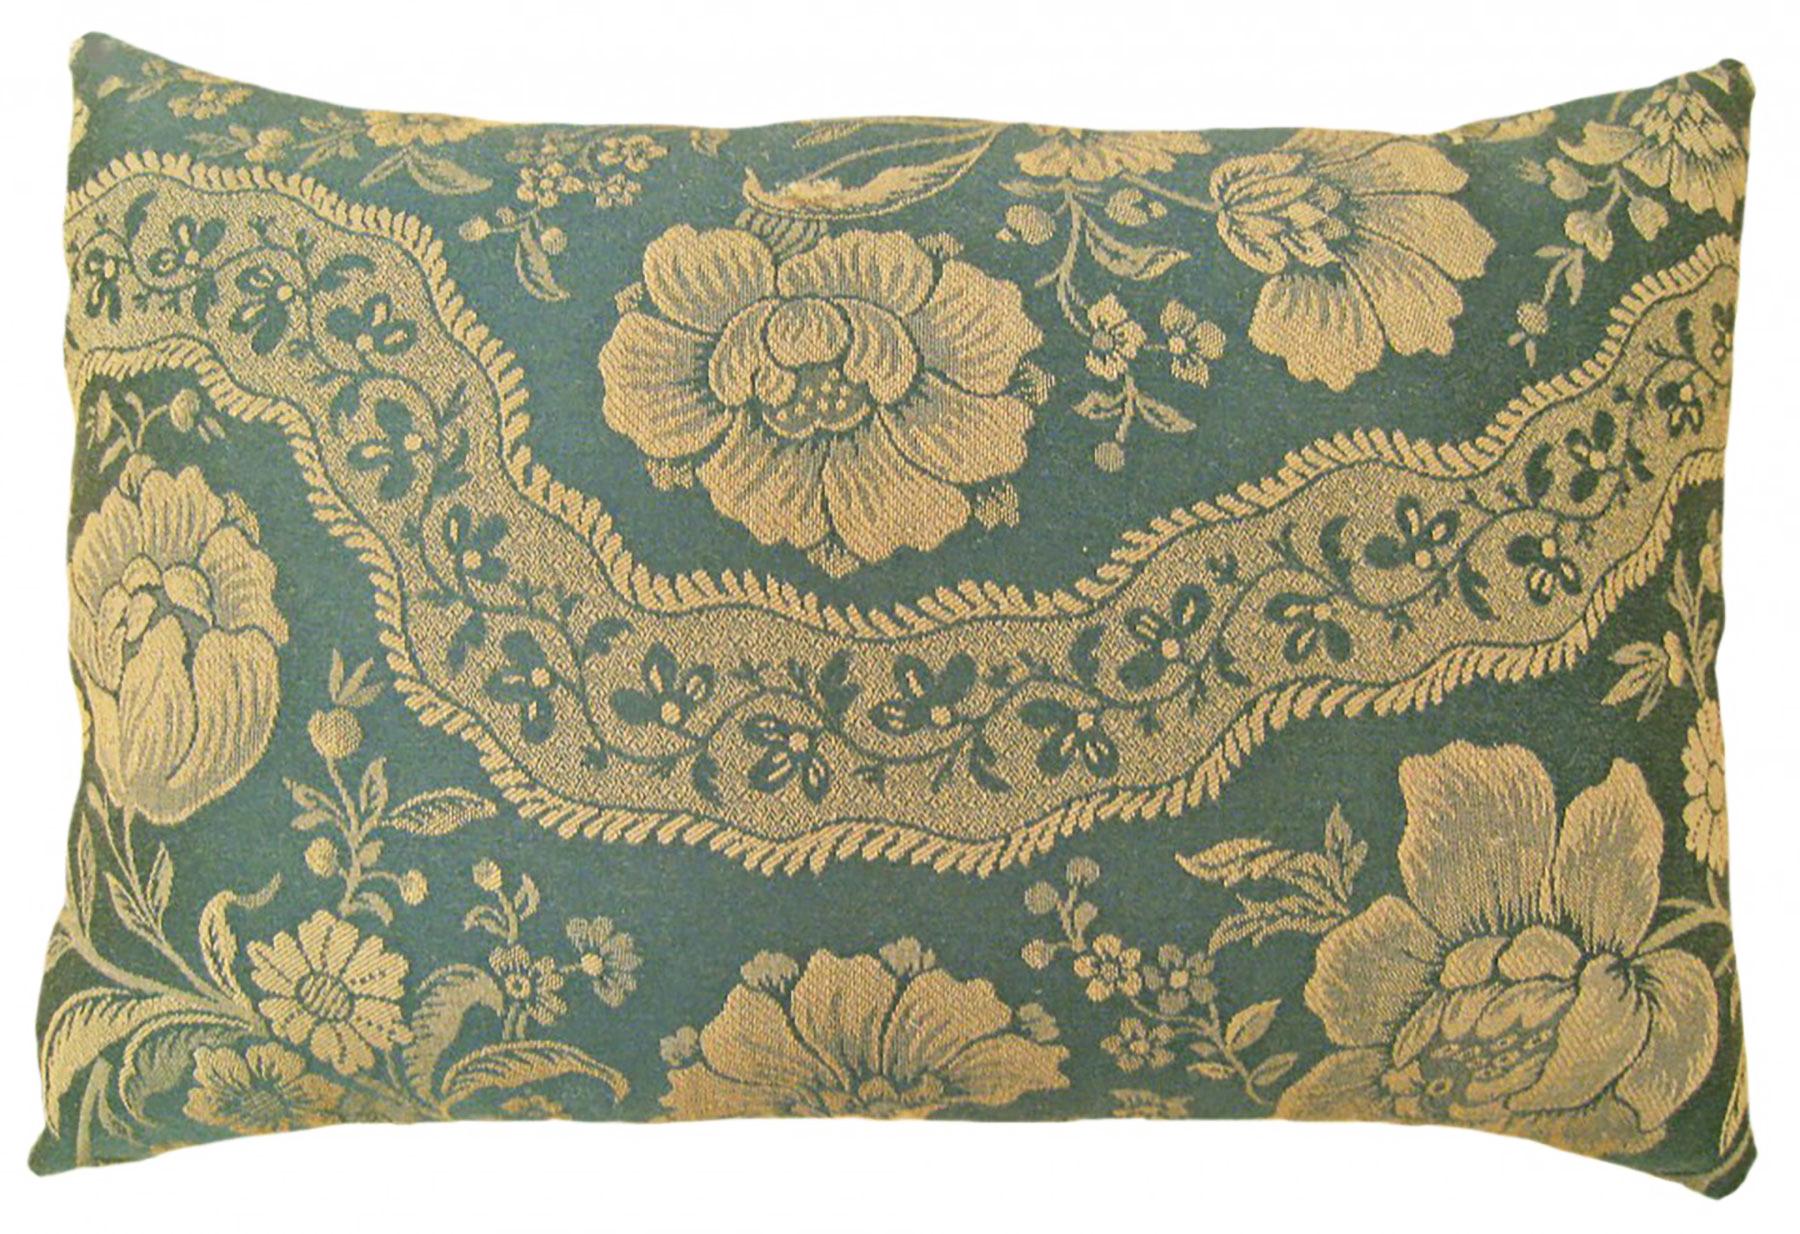 Pair of Decorative Vintage European Chinoiserie Fabric Pillows with Floral In Good Condition For Sale In New York, NY